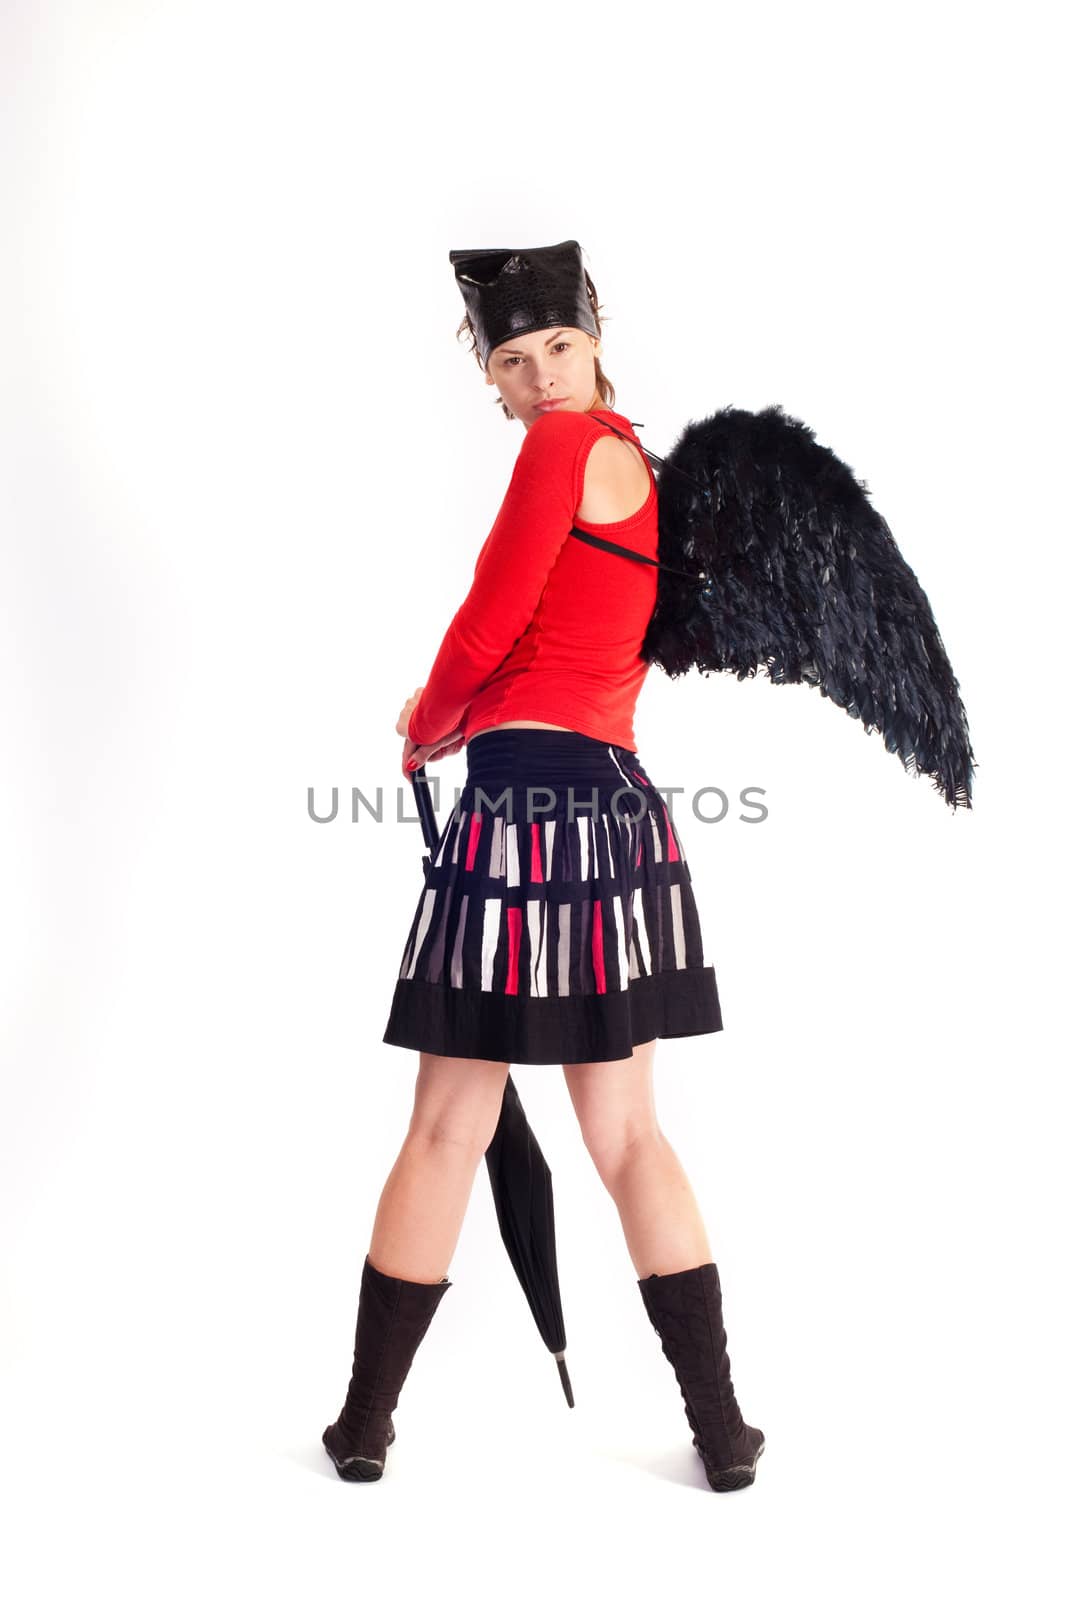 people series: young girl with black umbrella and wing